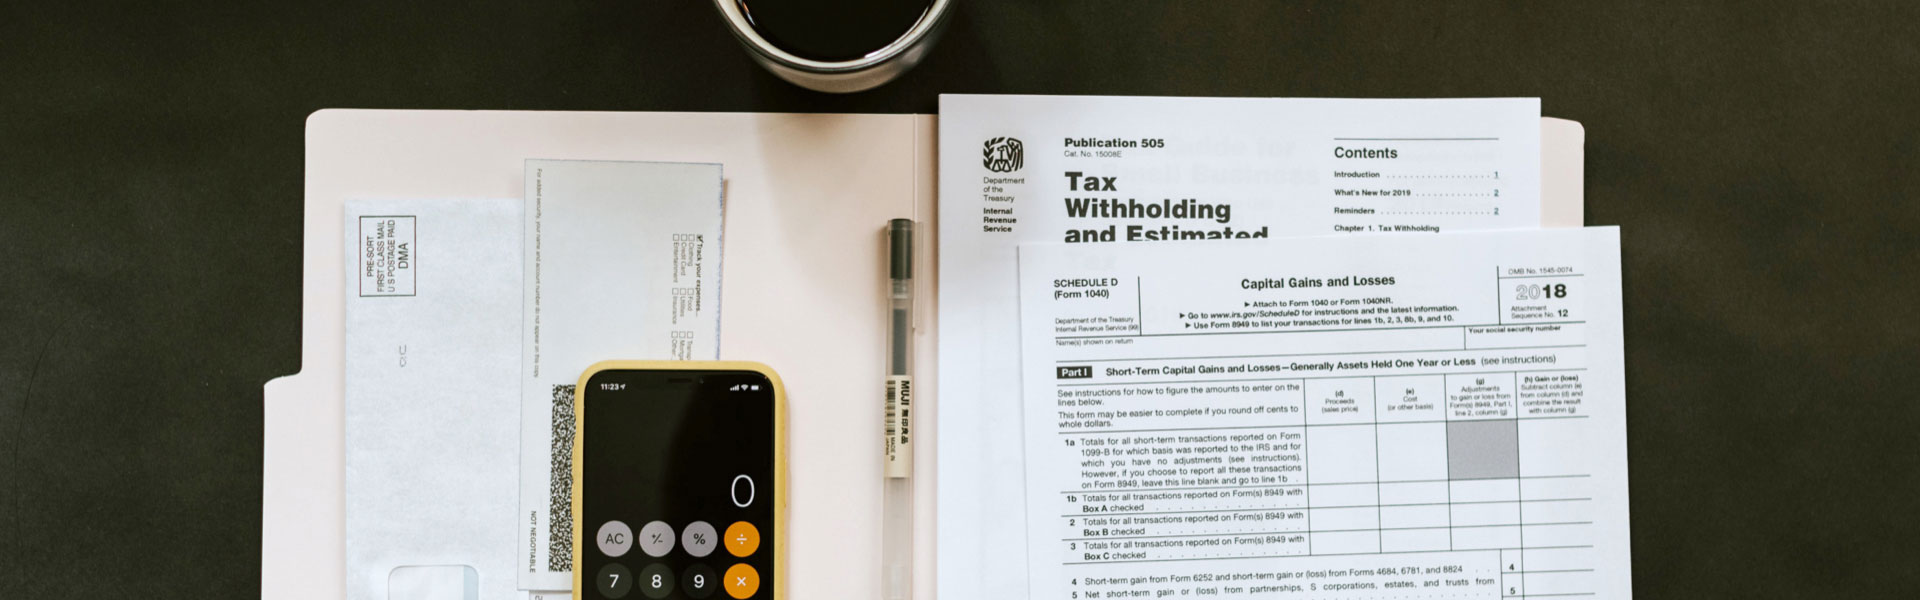 A Guide to Small Business Tax Deductions: Every Little Thing You Can Write-Off